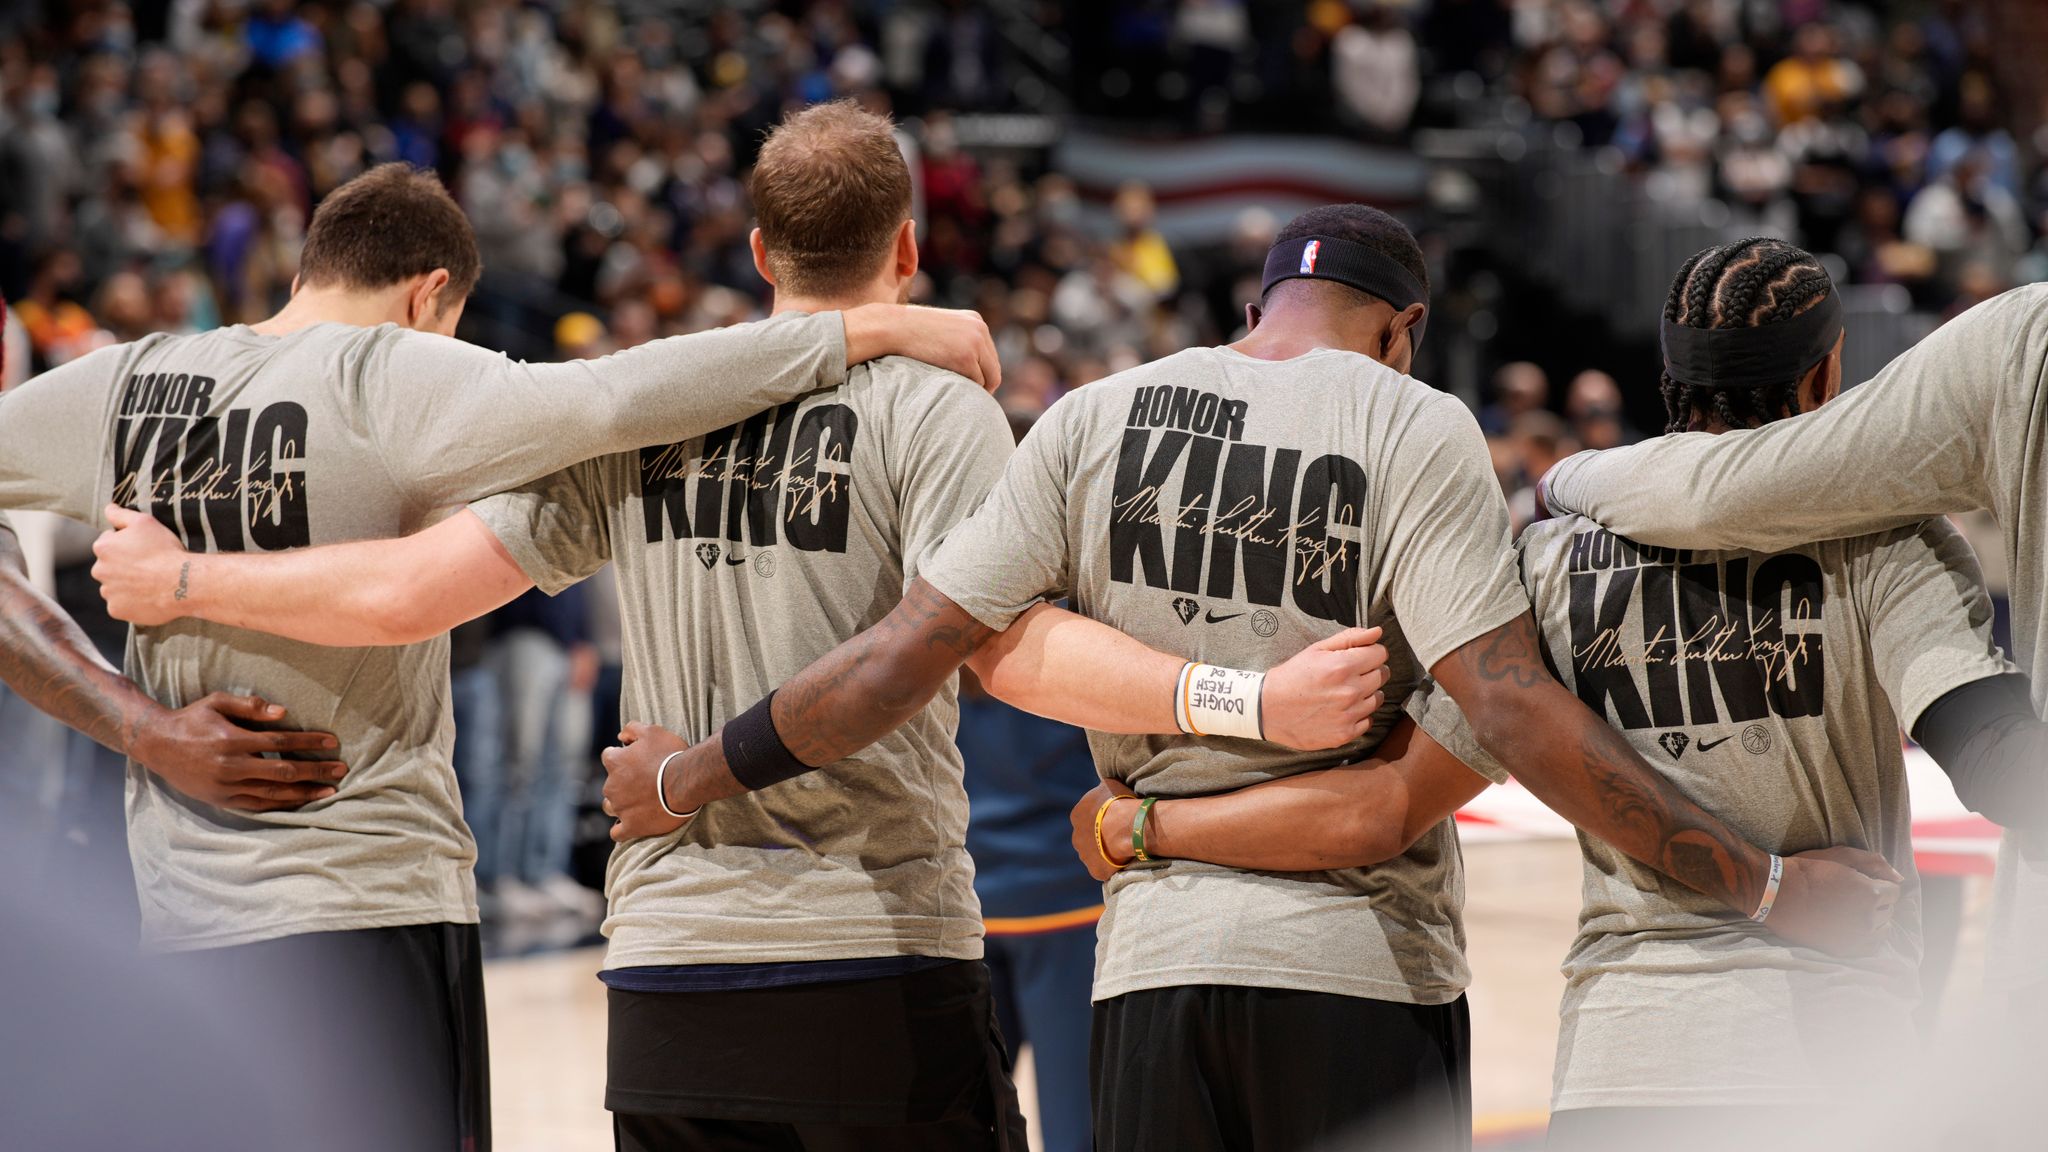 NBA Stages Full Court Press to Honor Dr. Martin Luther King Jr.